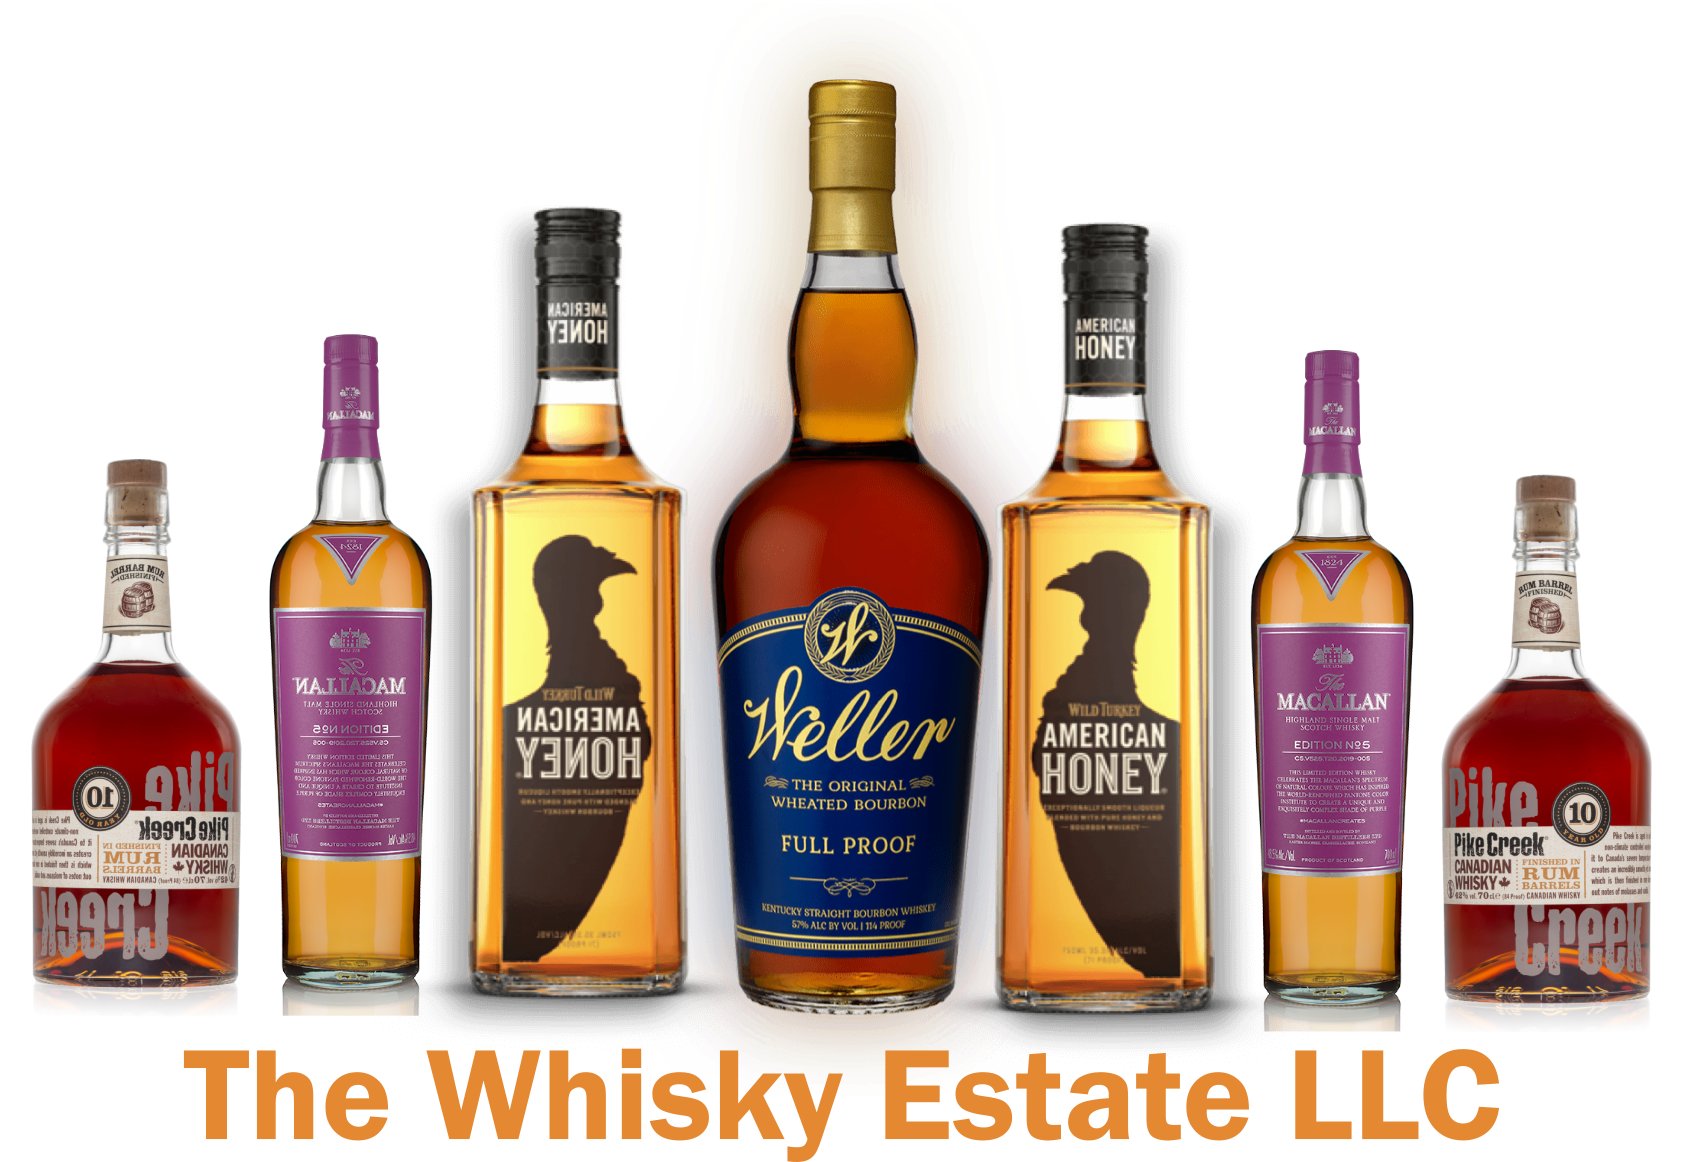 The Whisky Estate